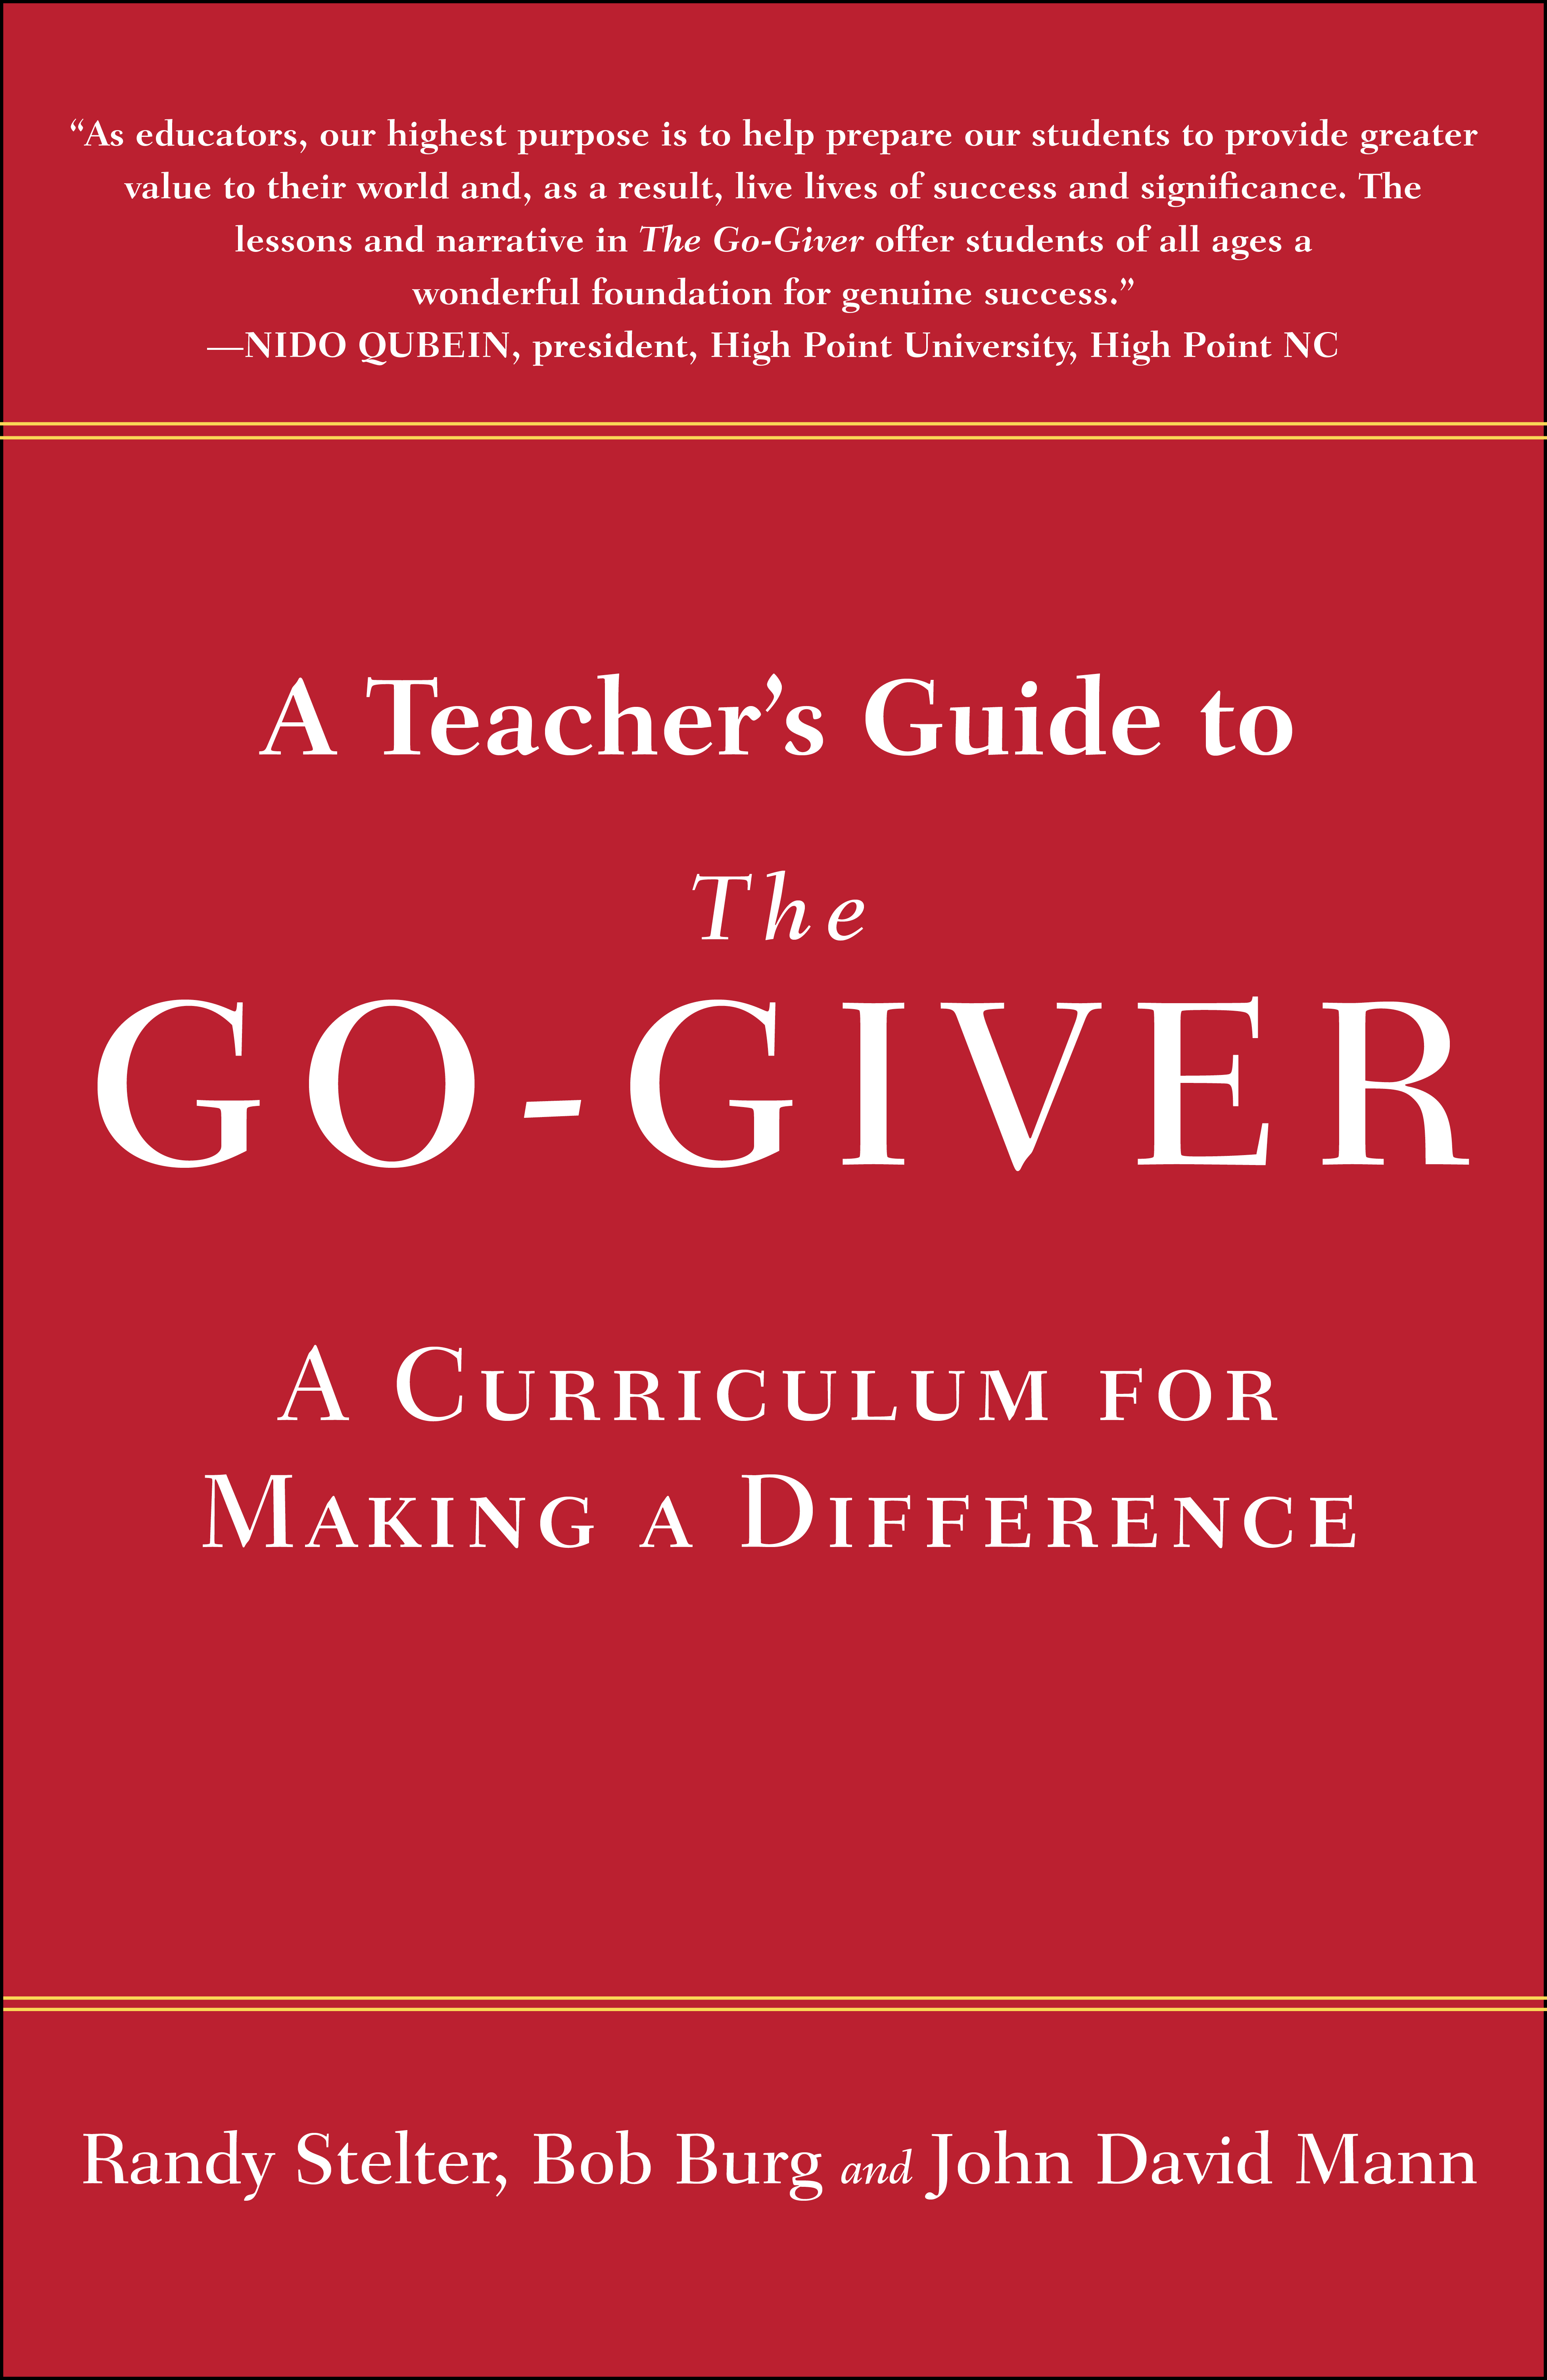 A Teacher’s Guide to The Go-Giver